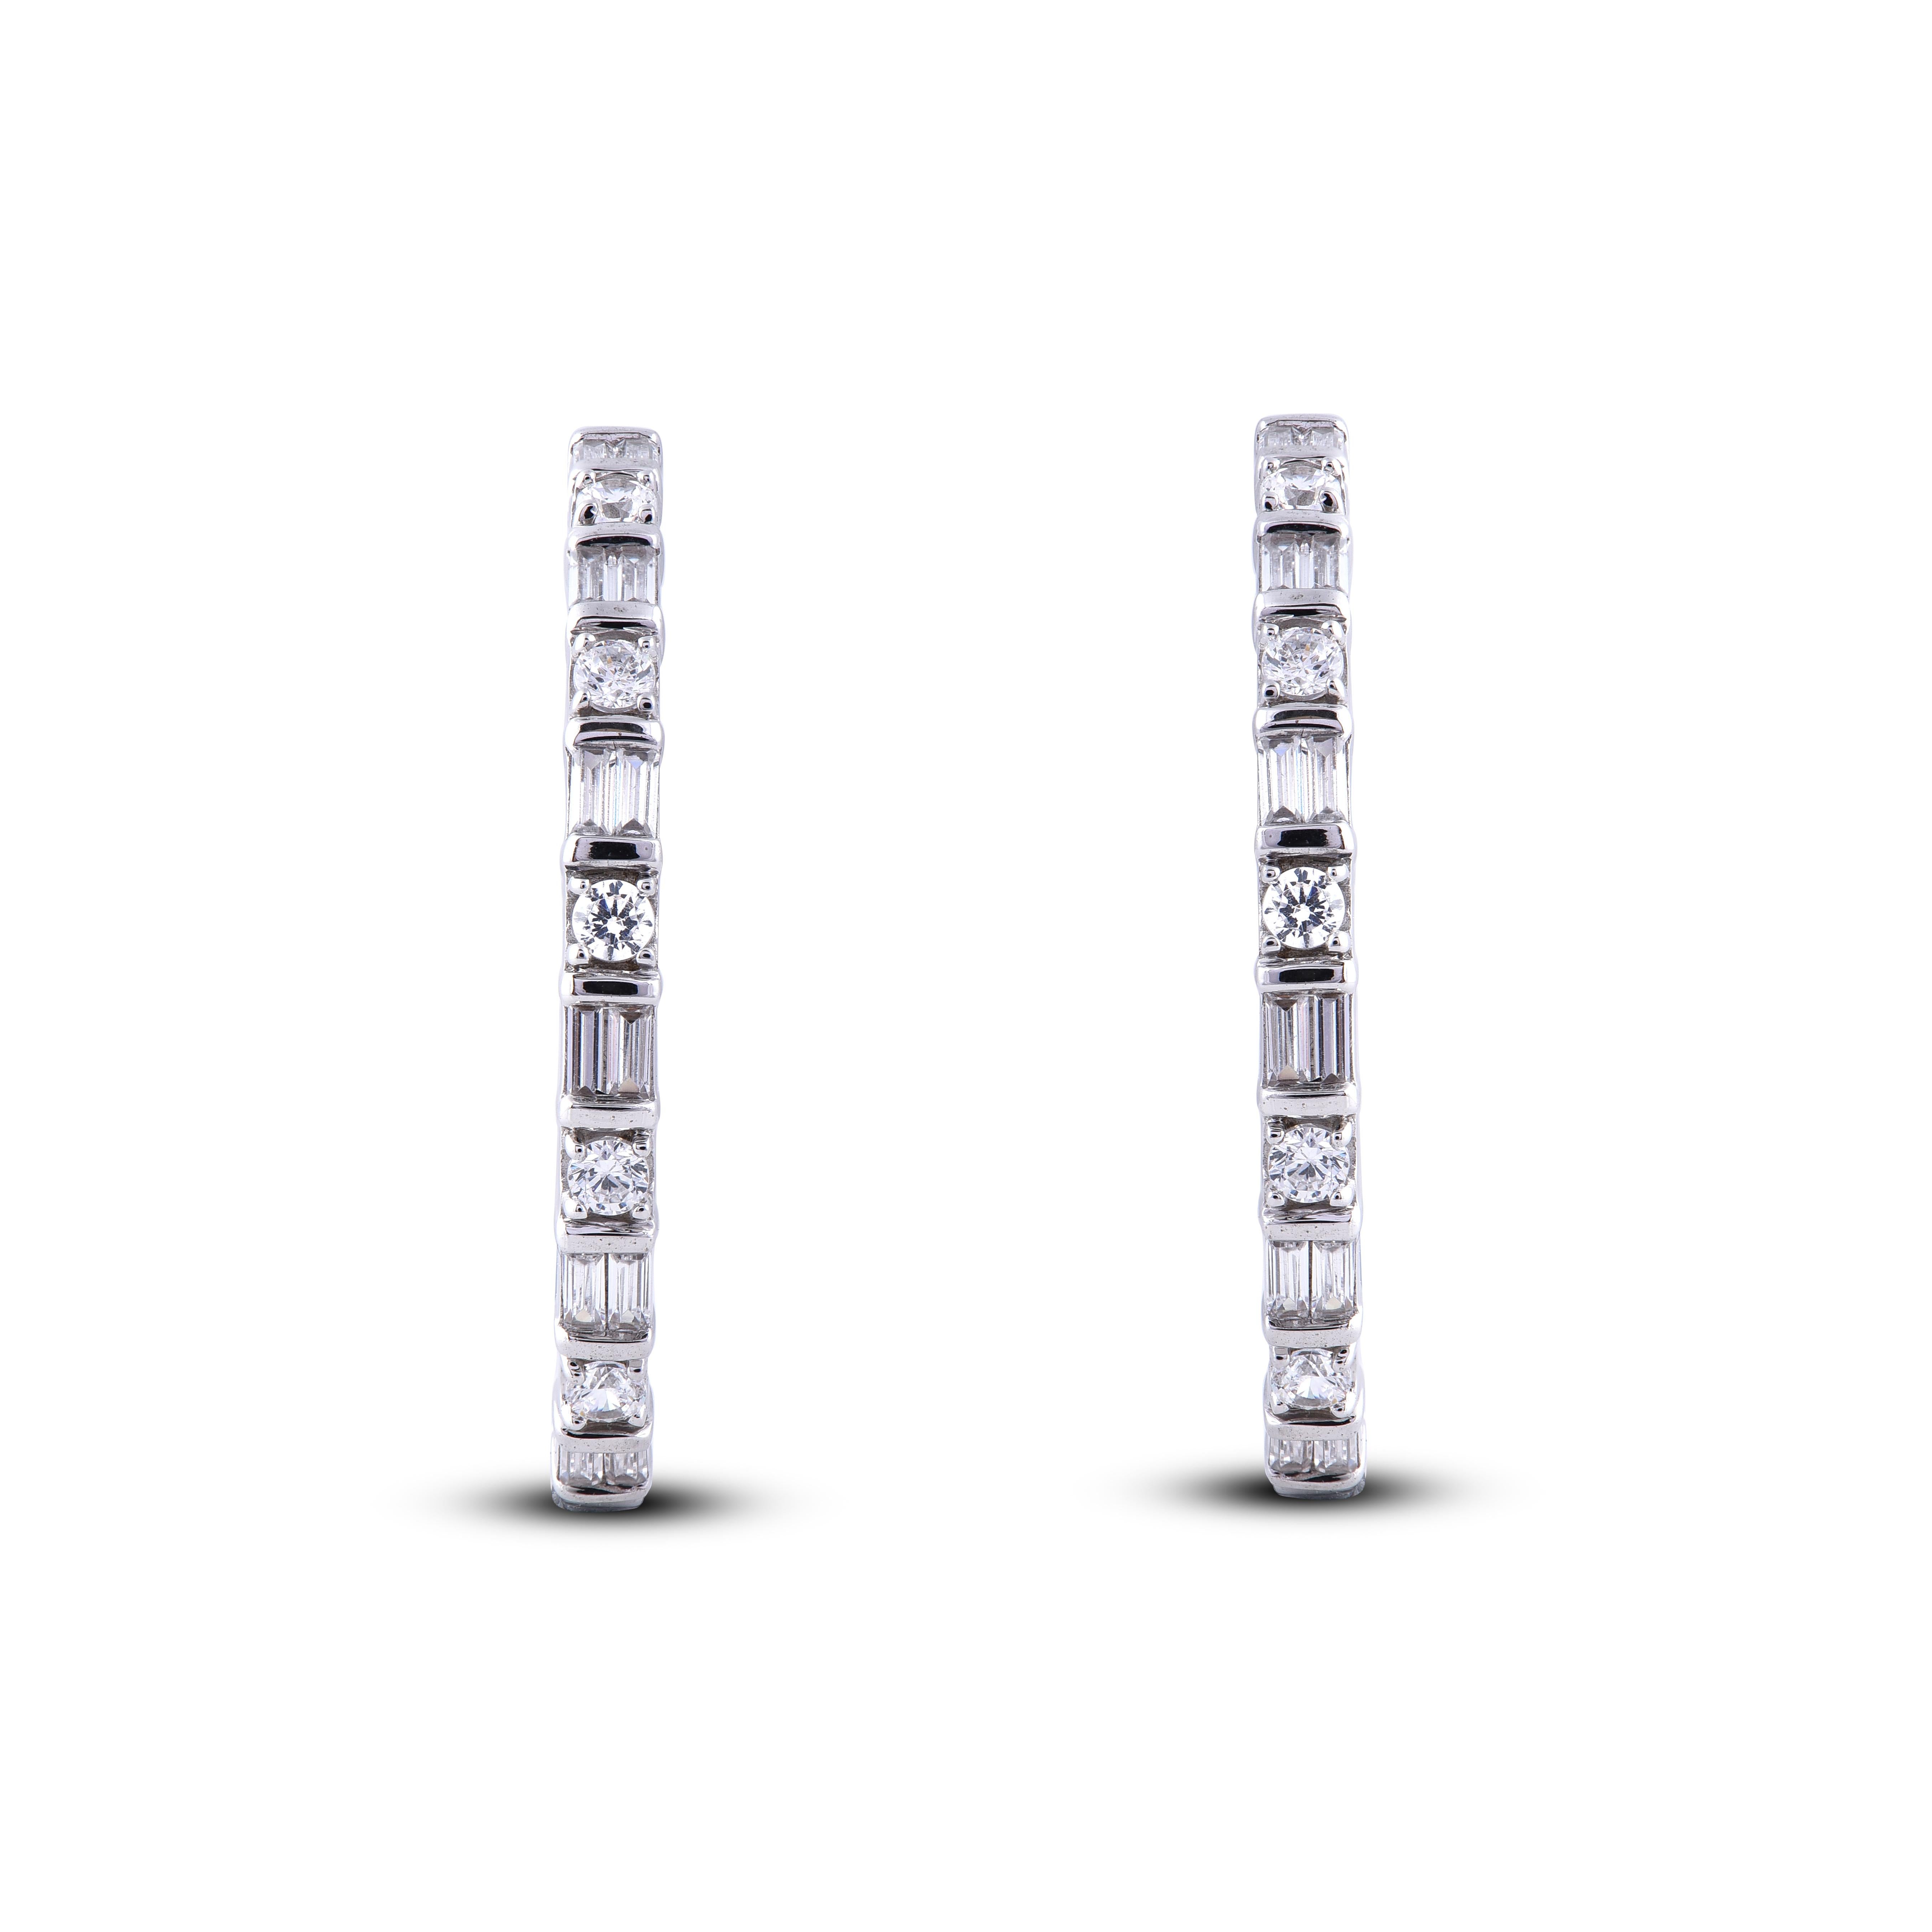 Modern and mesmerizing, these diamond hoop earrings are an eye catchy look for any occasion. Embedded with 18 round and 44 Baguette cut diamonds set in prong and channel setting and dazzles in H-I color I2 clarity. Crafted by our inhouse experts in